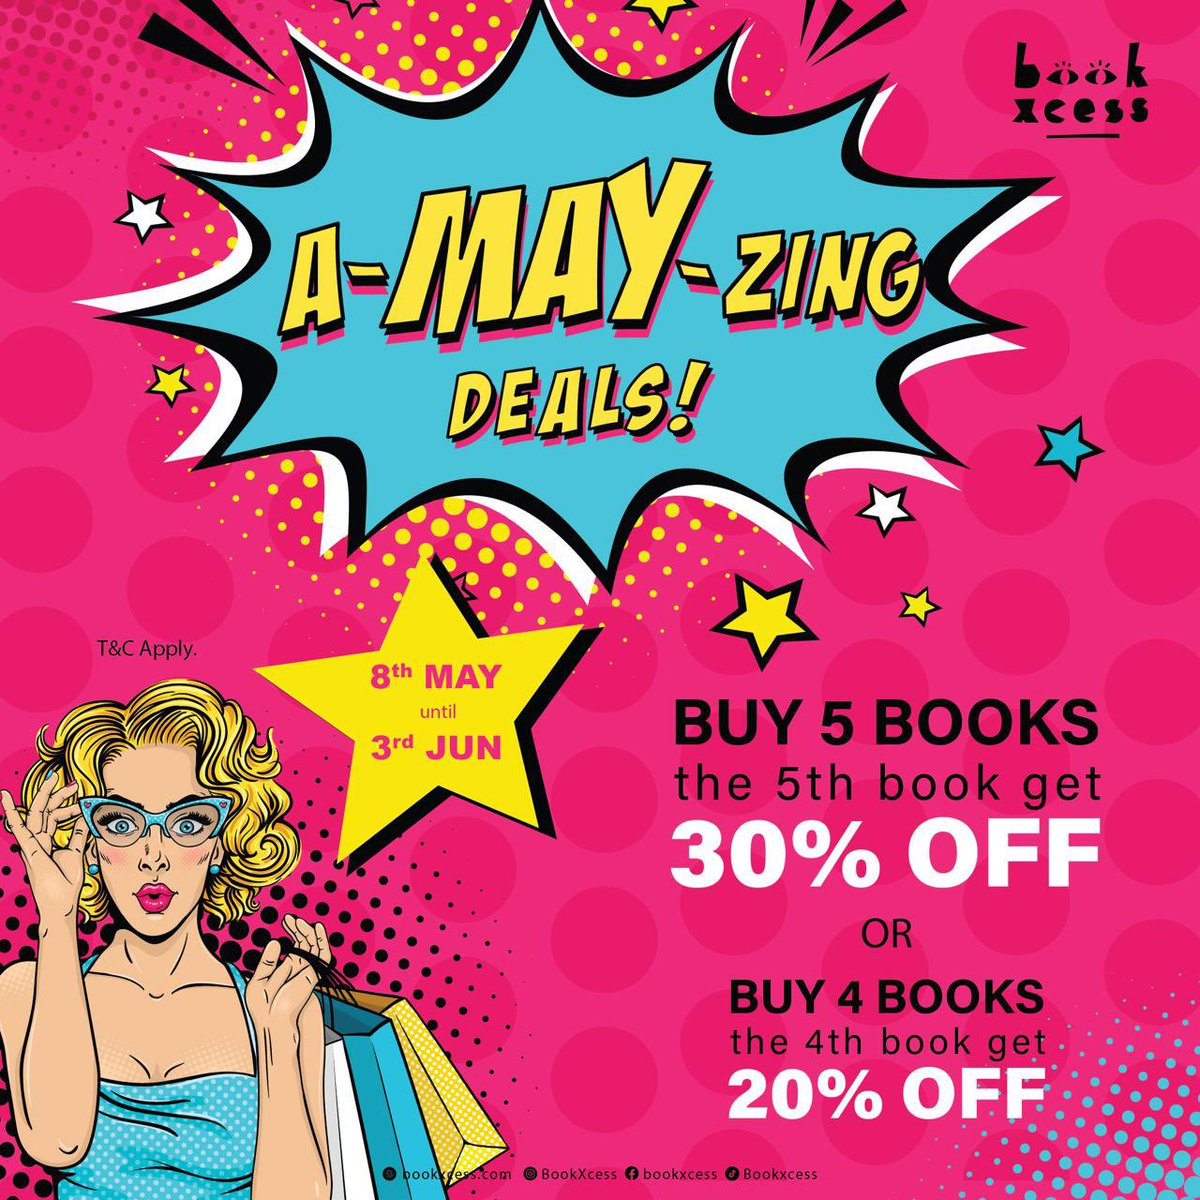 📖 It's raining deals at BookXcess this #AMayZing May . Stack up on savings with unbeatable discounts: 20% off on 4th book, 30% off on 5th book.  Let's celebrate the joy of reading together. #BookXcess #BookDeals 📚